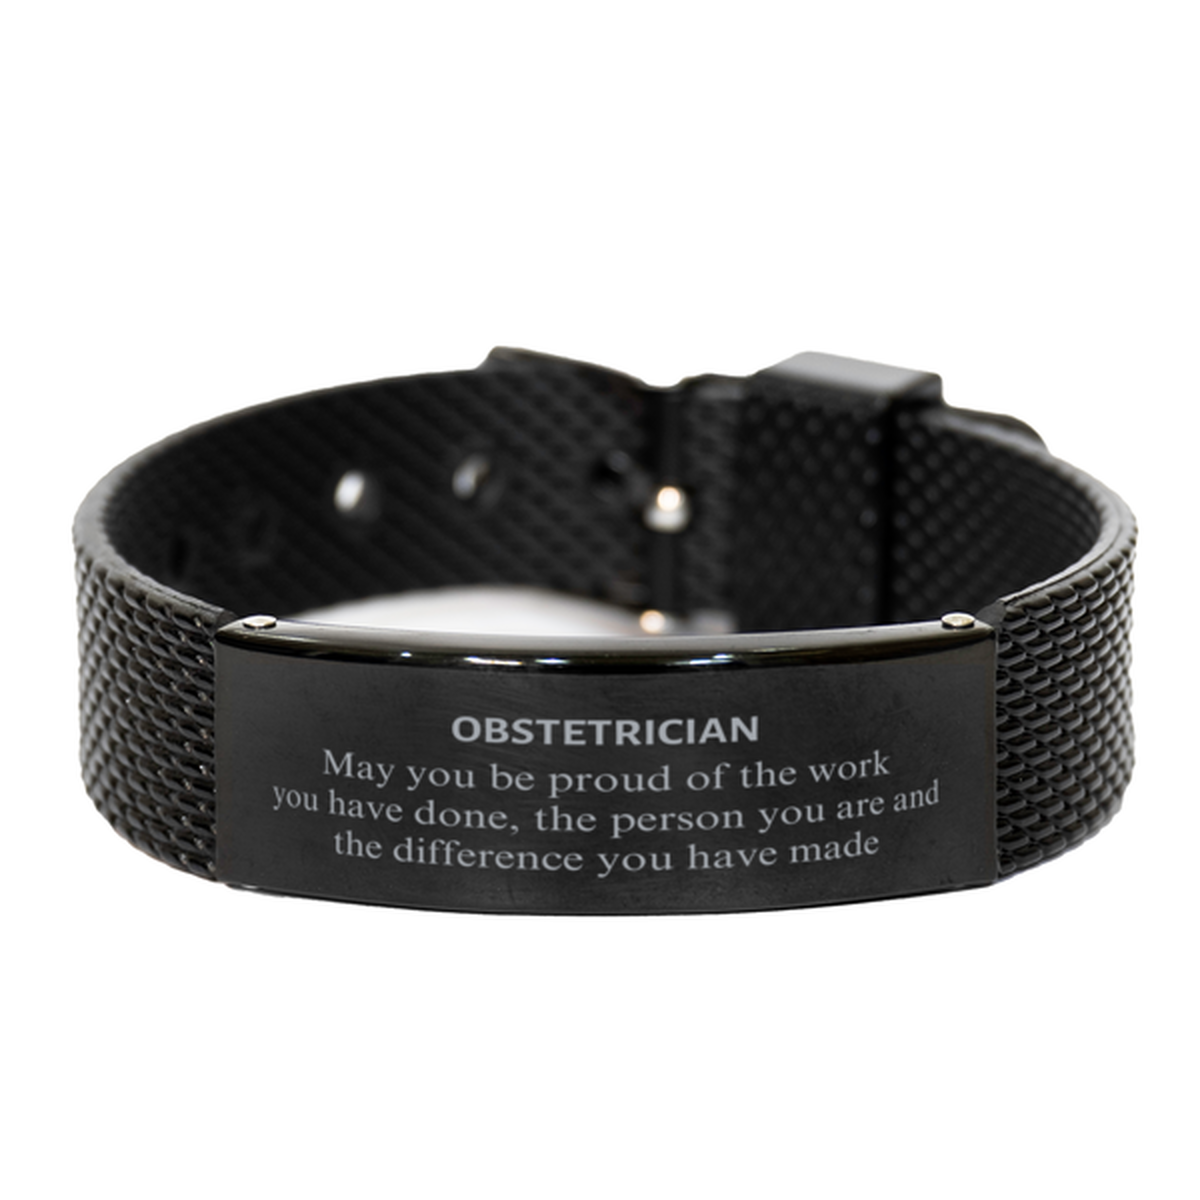 Obstetrician May you be proud of the work you have done, Retirement Obstetrician Black Shark Mesh Bracelet for Colleague Appreciation Gifts Amazing for Obstetrician